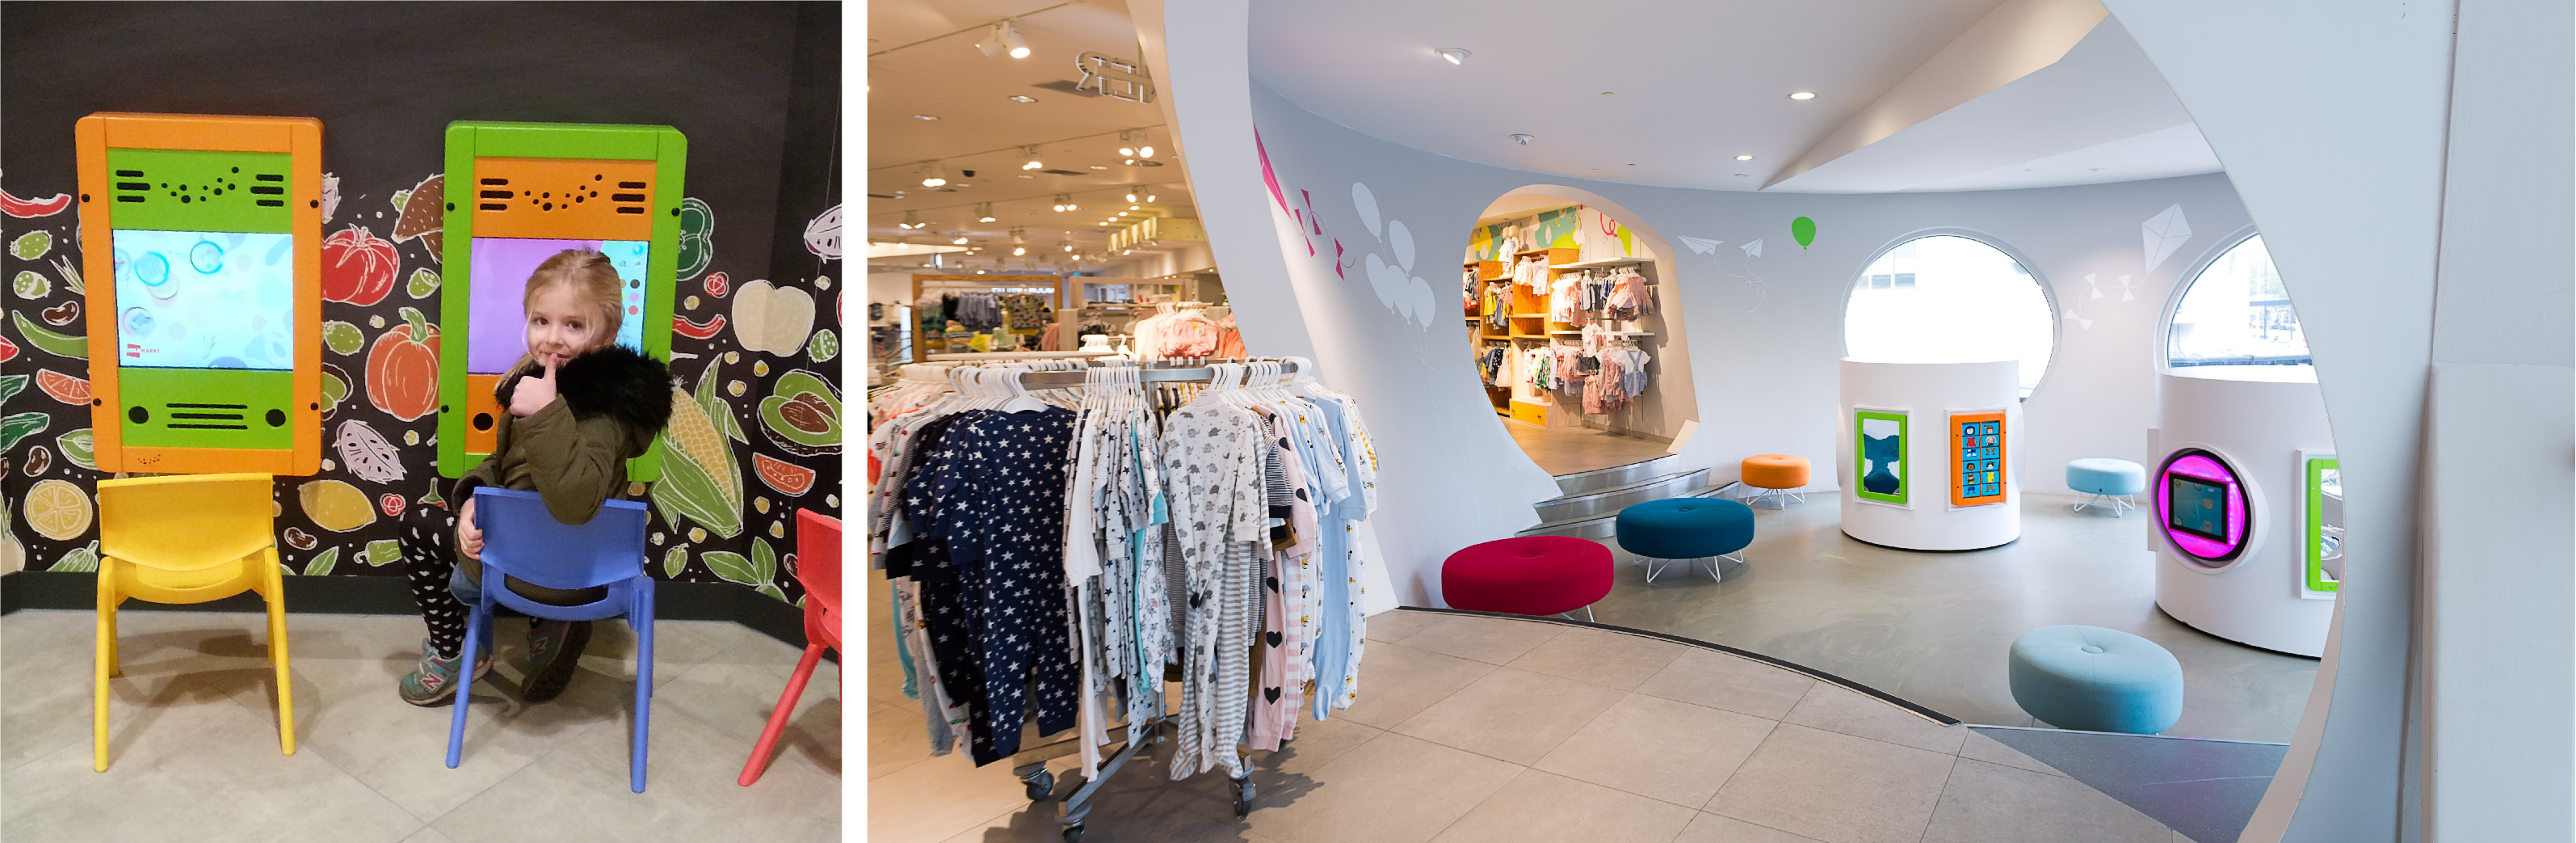 this image shows a kids corner in a clothing store